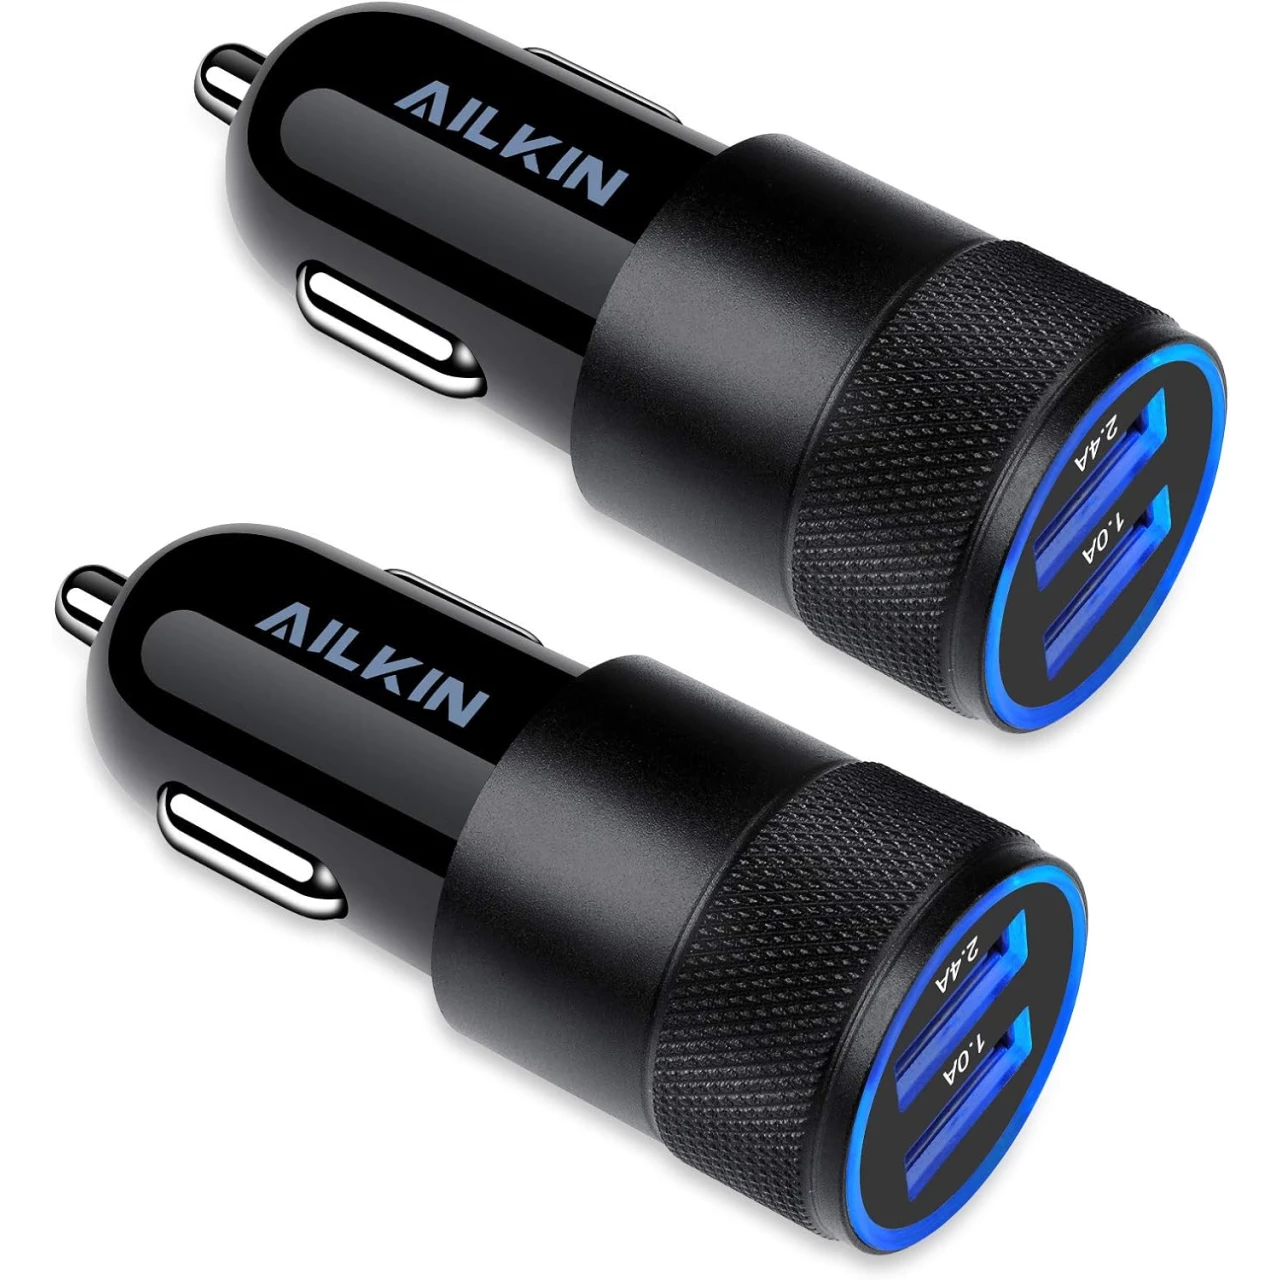 Car Charger, [2Pack/3.4a] Fast Charge Dual Port USB Cargador Carro Lighter Adapter for iPhone 14 13 12 11 Pro Max X XR XS 8 Plus 6s, iPad, Samsung Galaxy S22 S21 S10 Plus S7 j7 S10e S9 Note 8, LG, GPS